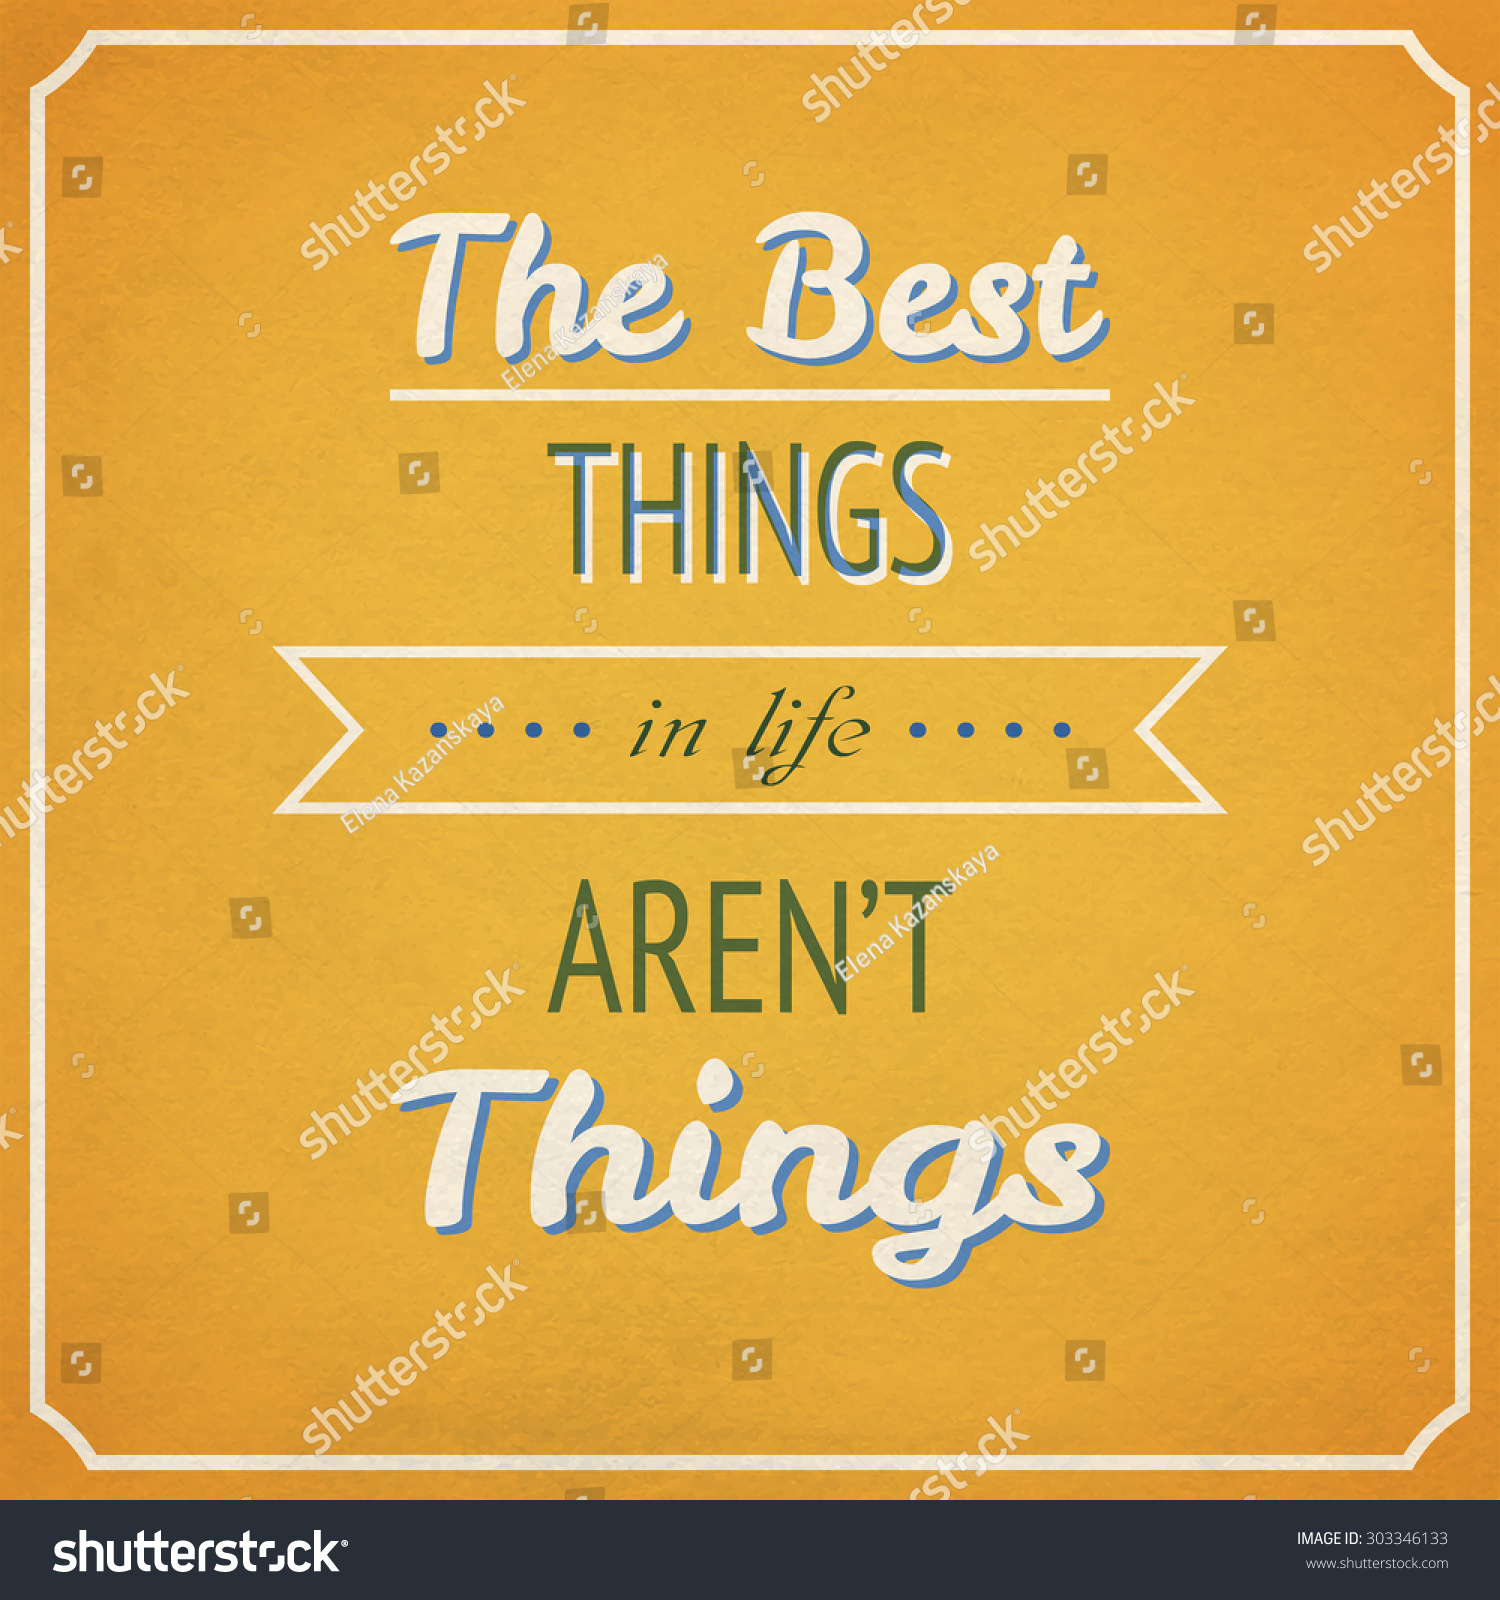 The Best Things In Life Aren t Things vintage background with quote